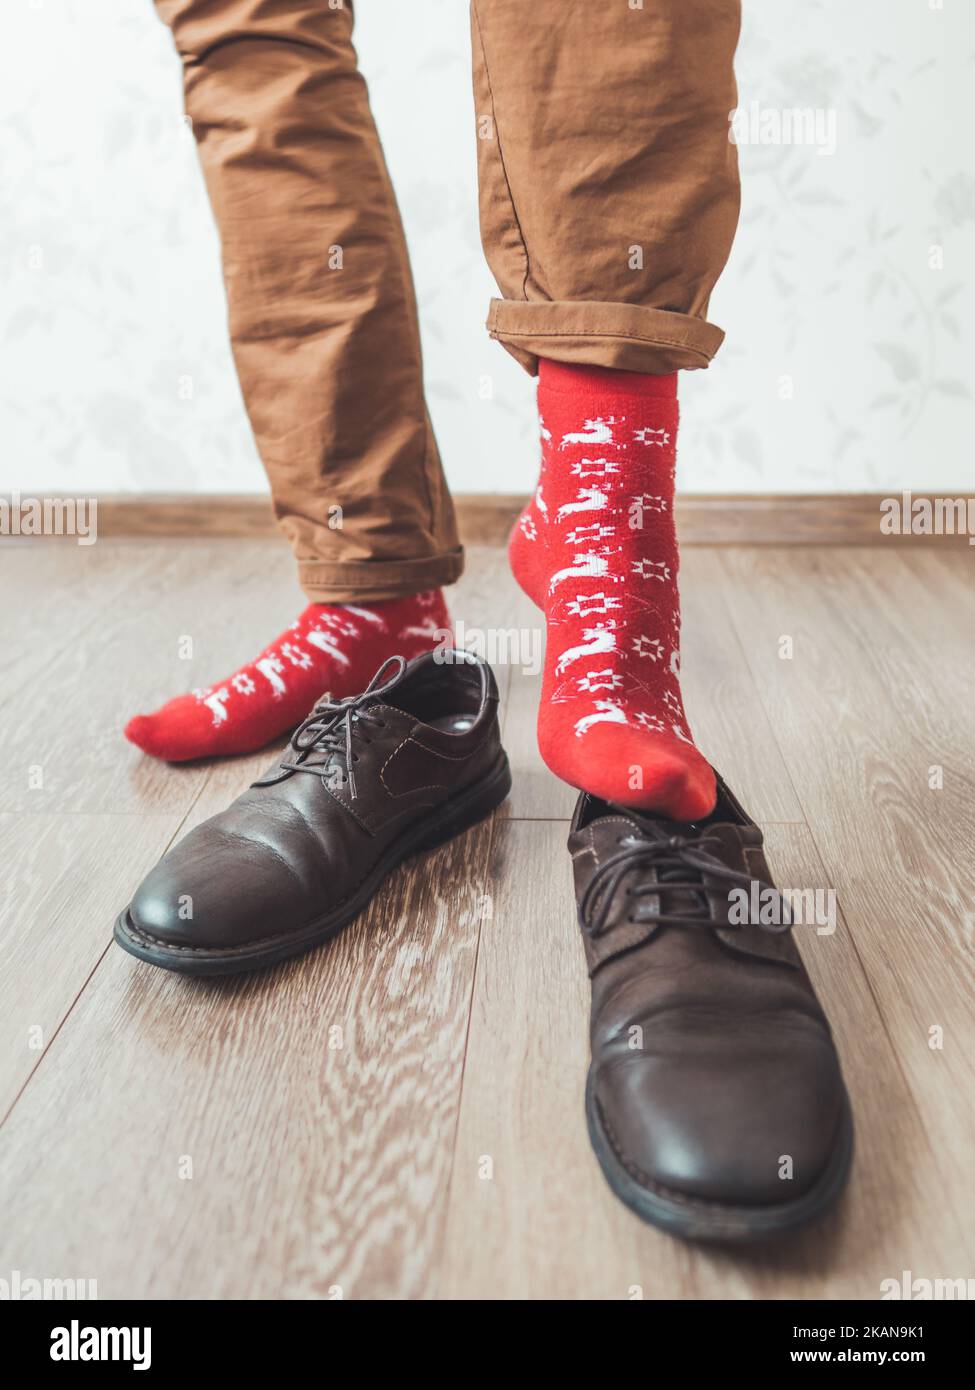 Young man in chinos trousers and bright red socks with reindeers on them is ready to wear suede shoes. Scandinavian pattern. Winter holiday spirit. Ca Stock Photo